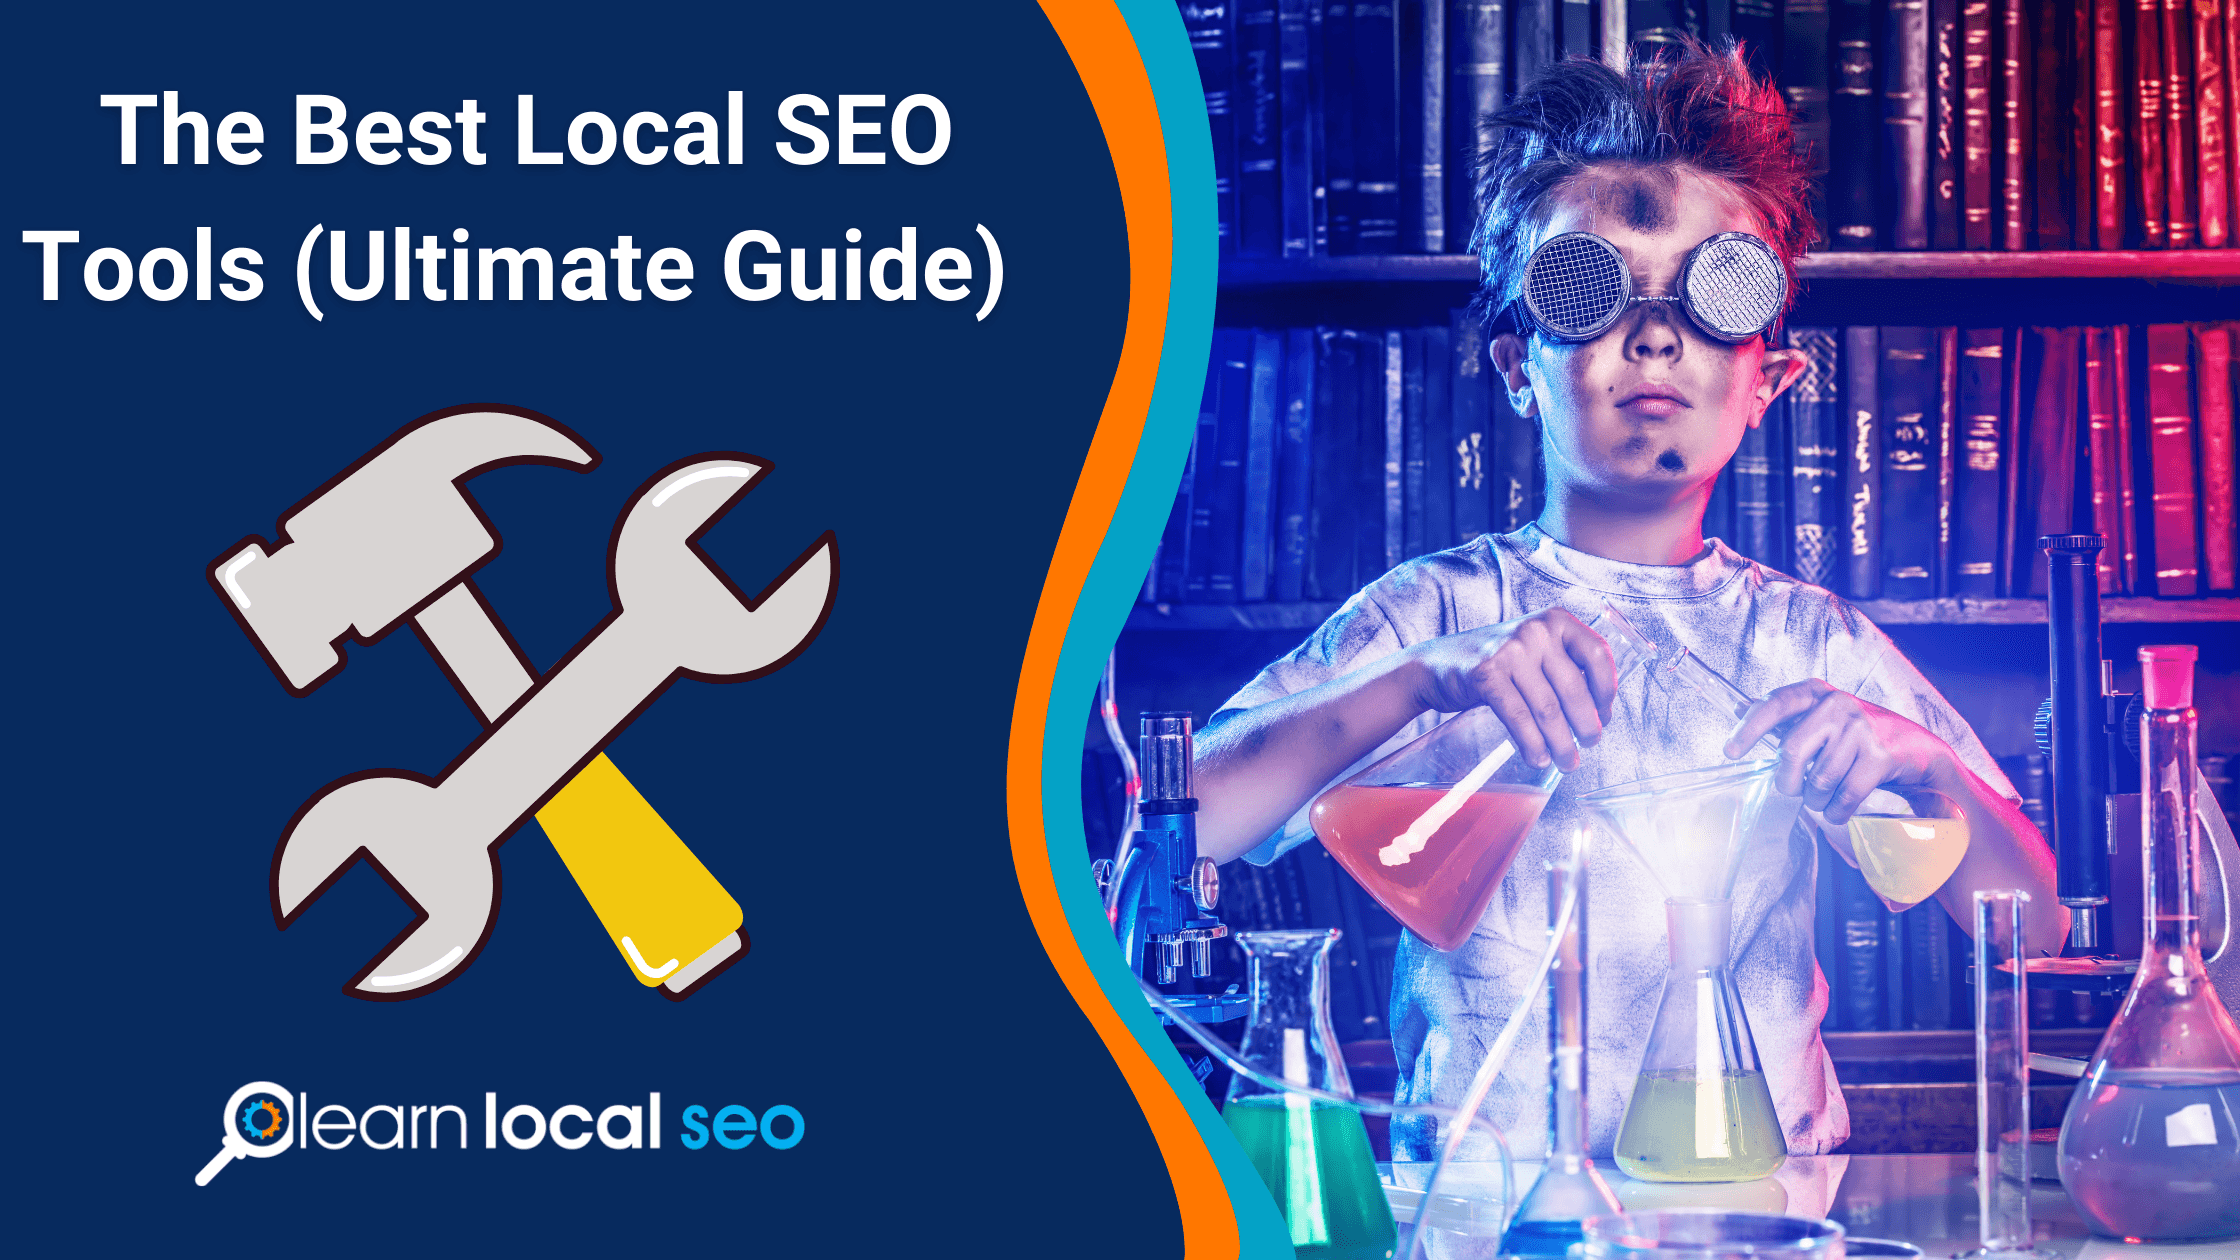 Best Local SEO Software